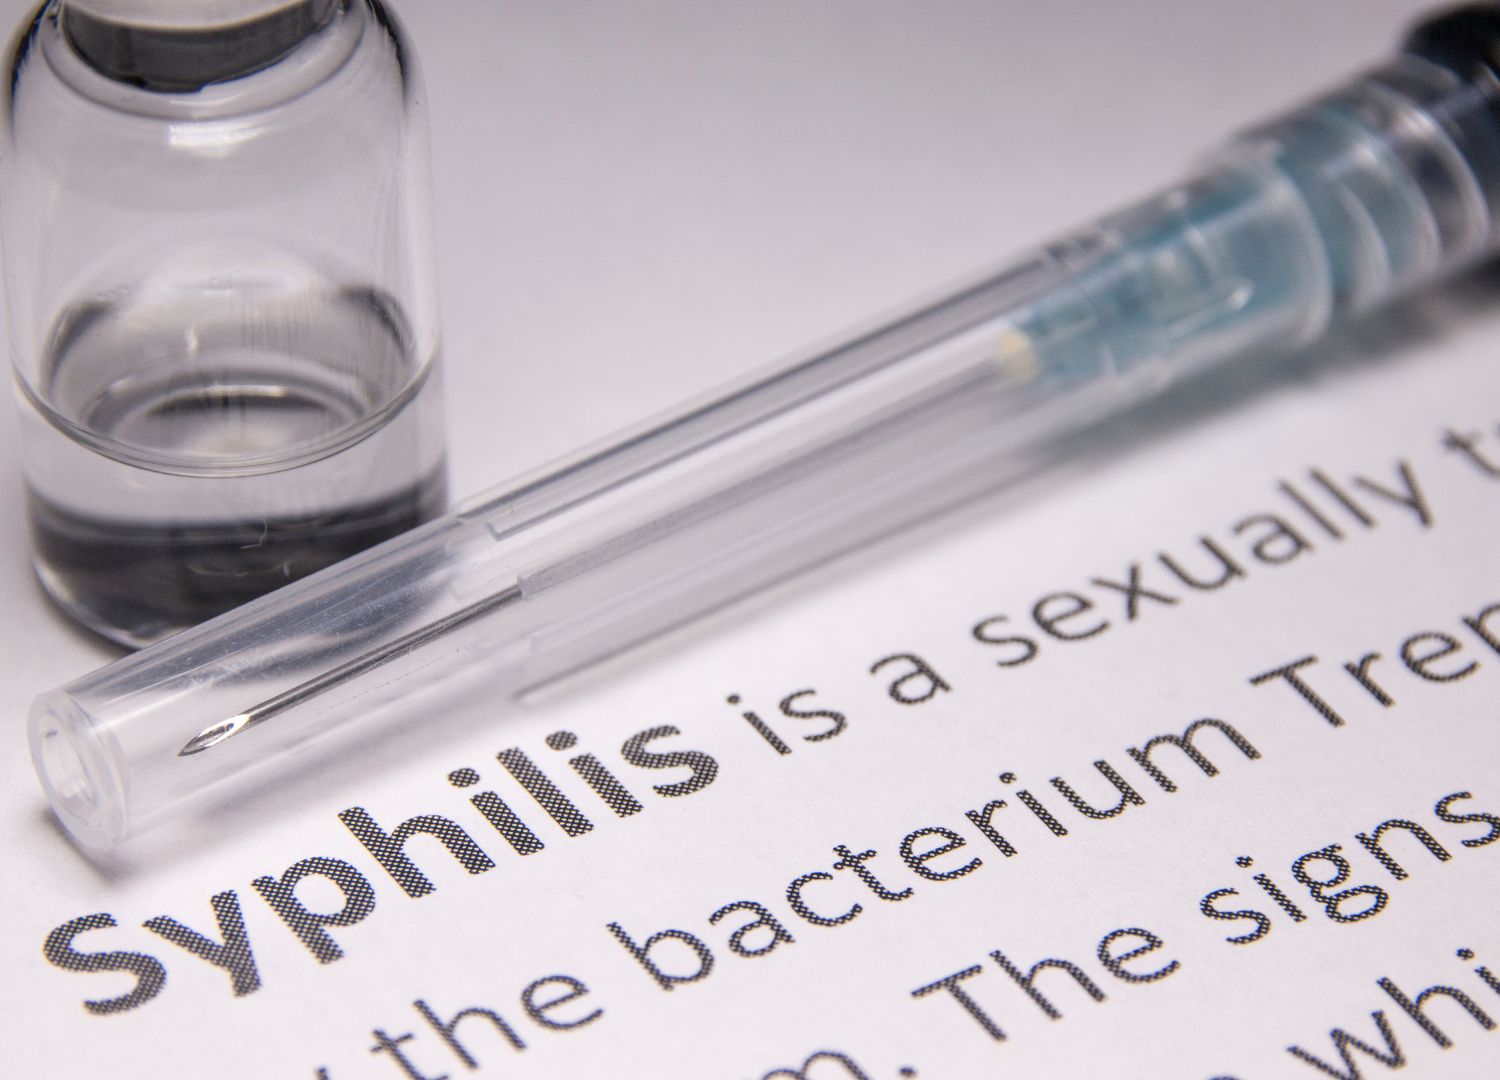 Syphilis: All you need to know